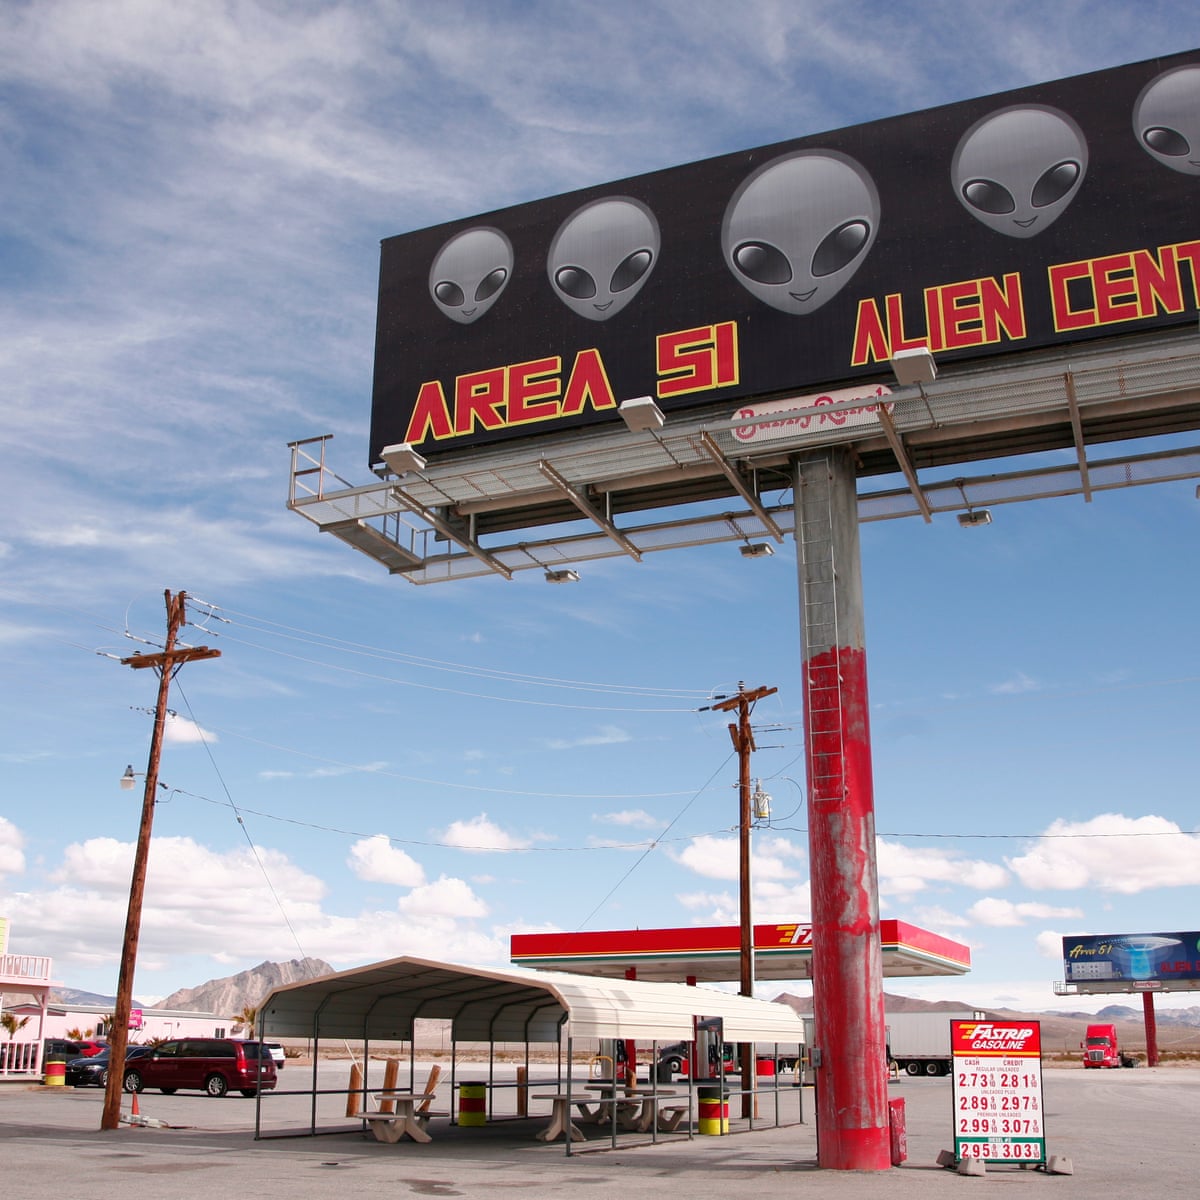 Why the joke Facebook page calling for people to storm Area 51 went viral |  Arwa Mahdawi | The Guardian